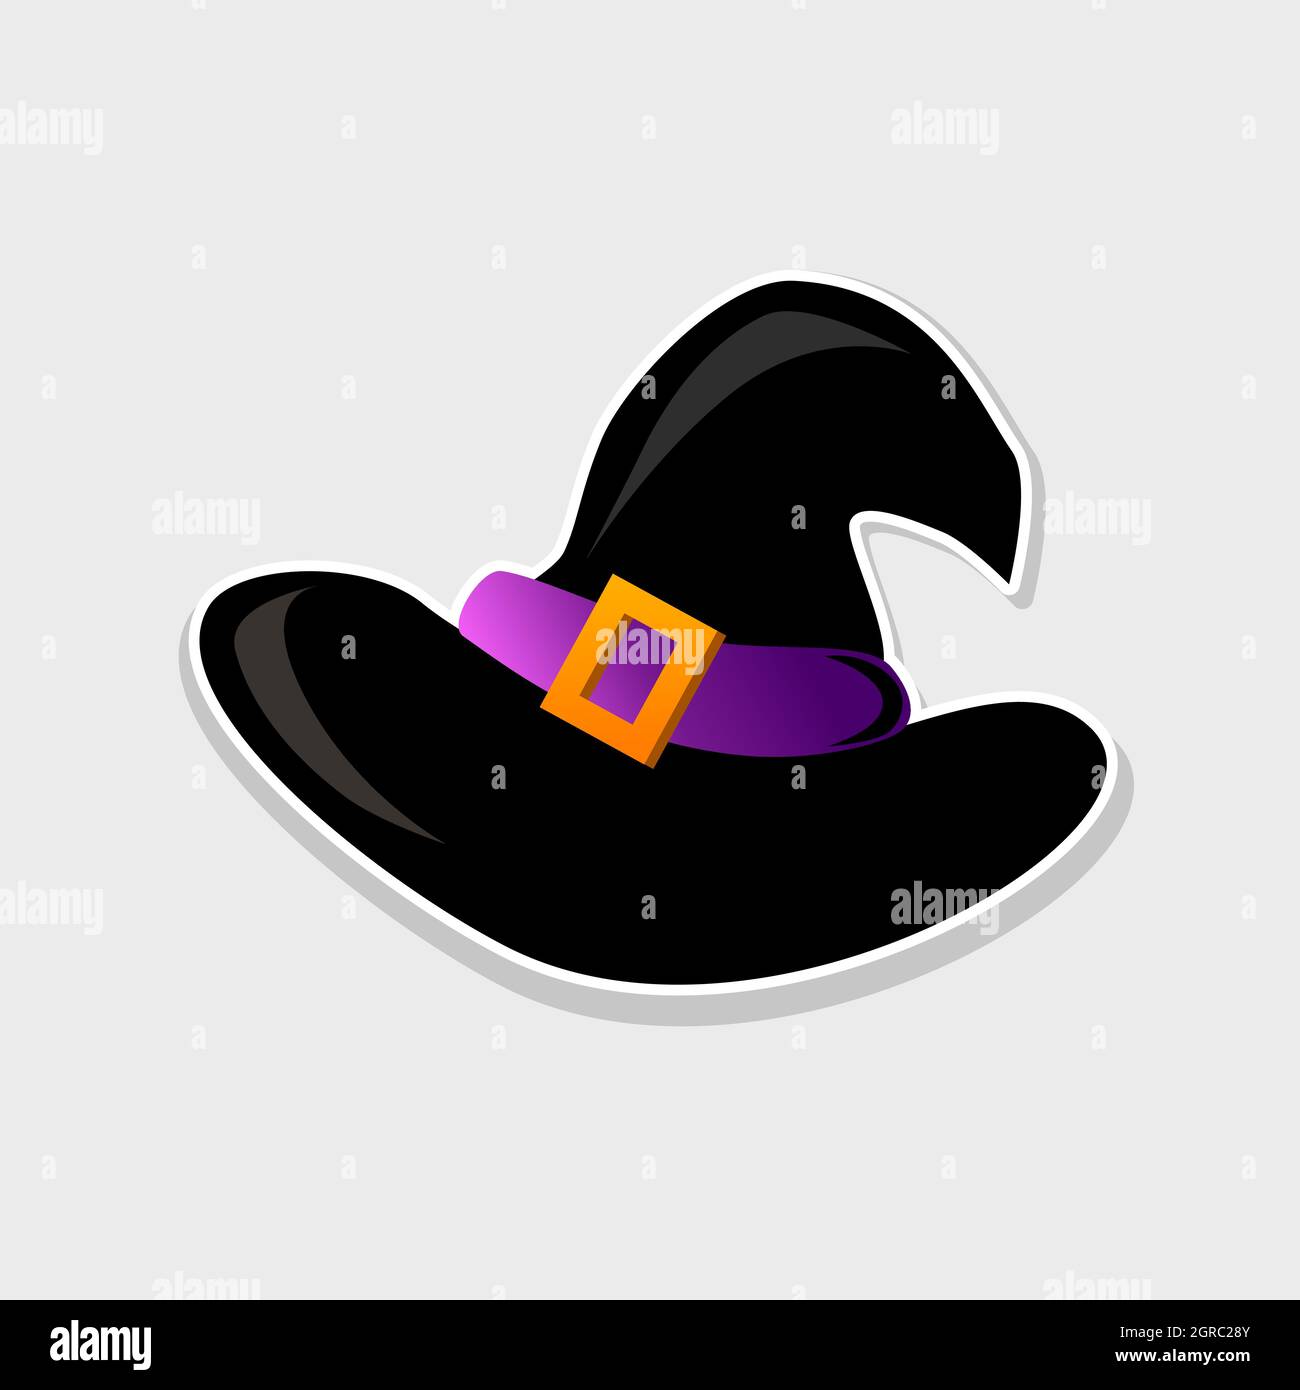 Vector black witch hat sticker icon for your Halloween decorations. Easy to recolour, with removable background. For party invites, sale banners, ads. Stock Vector